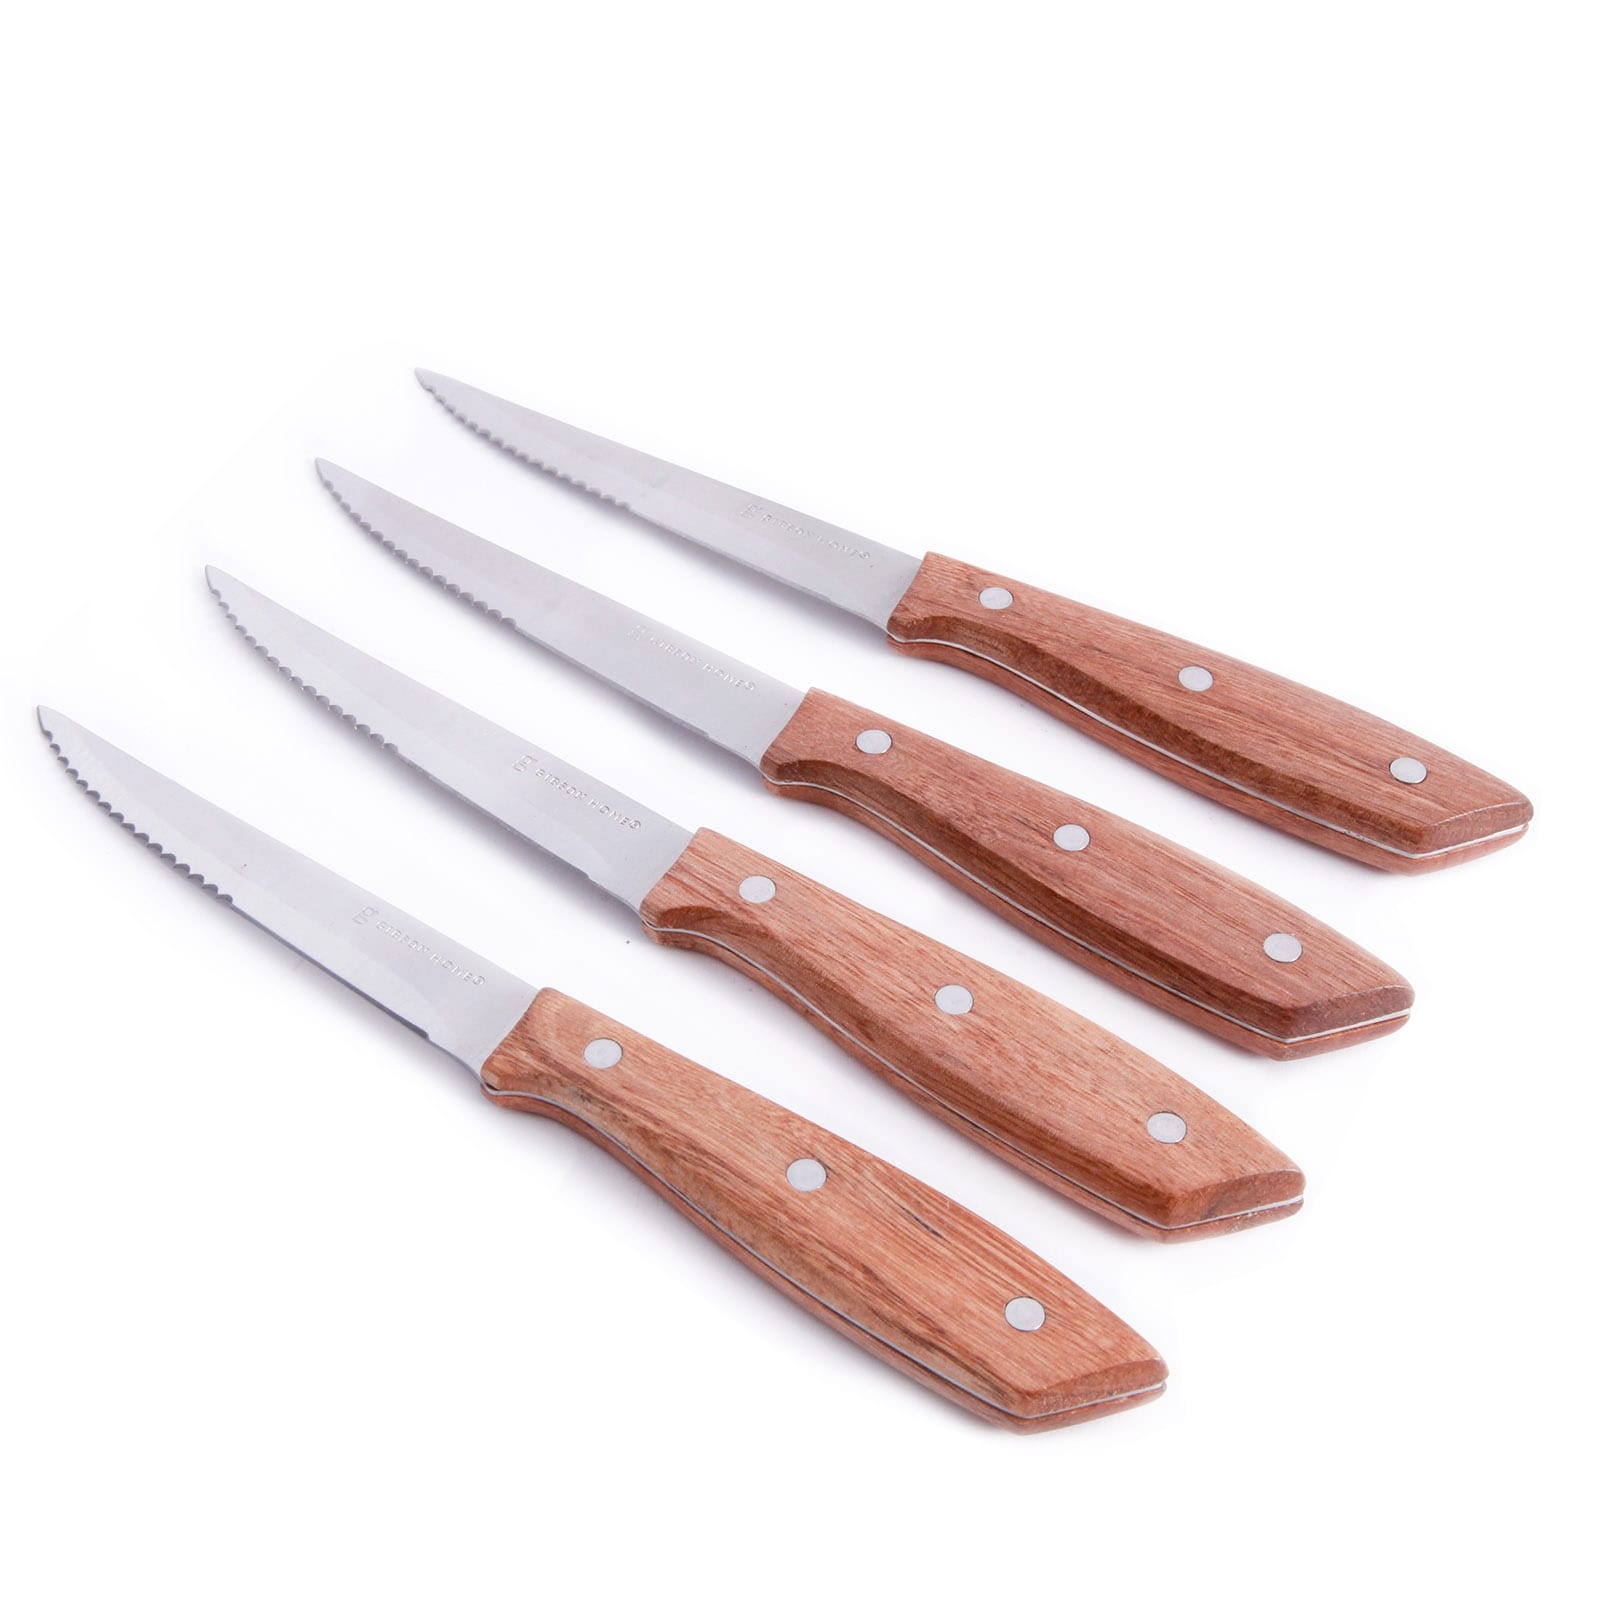 At Home Farberware 4-Piece Stamped Stainless Steel Steak Knife Set